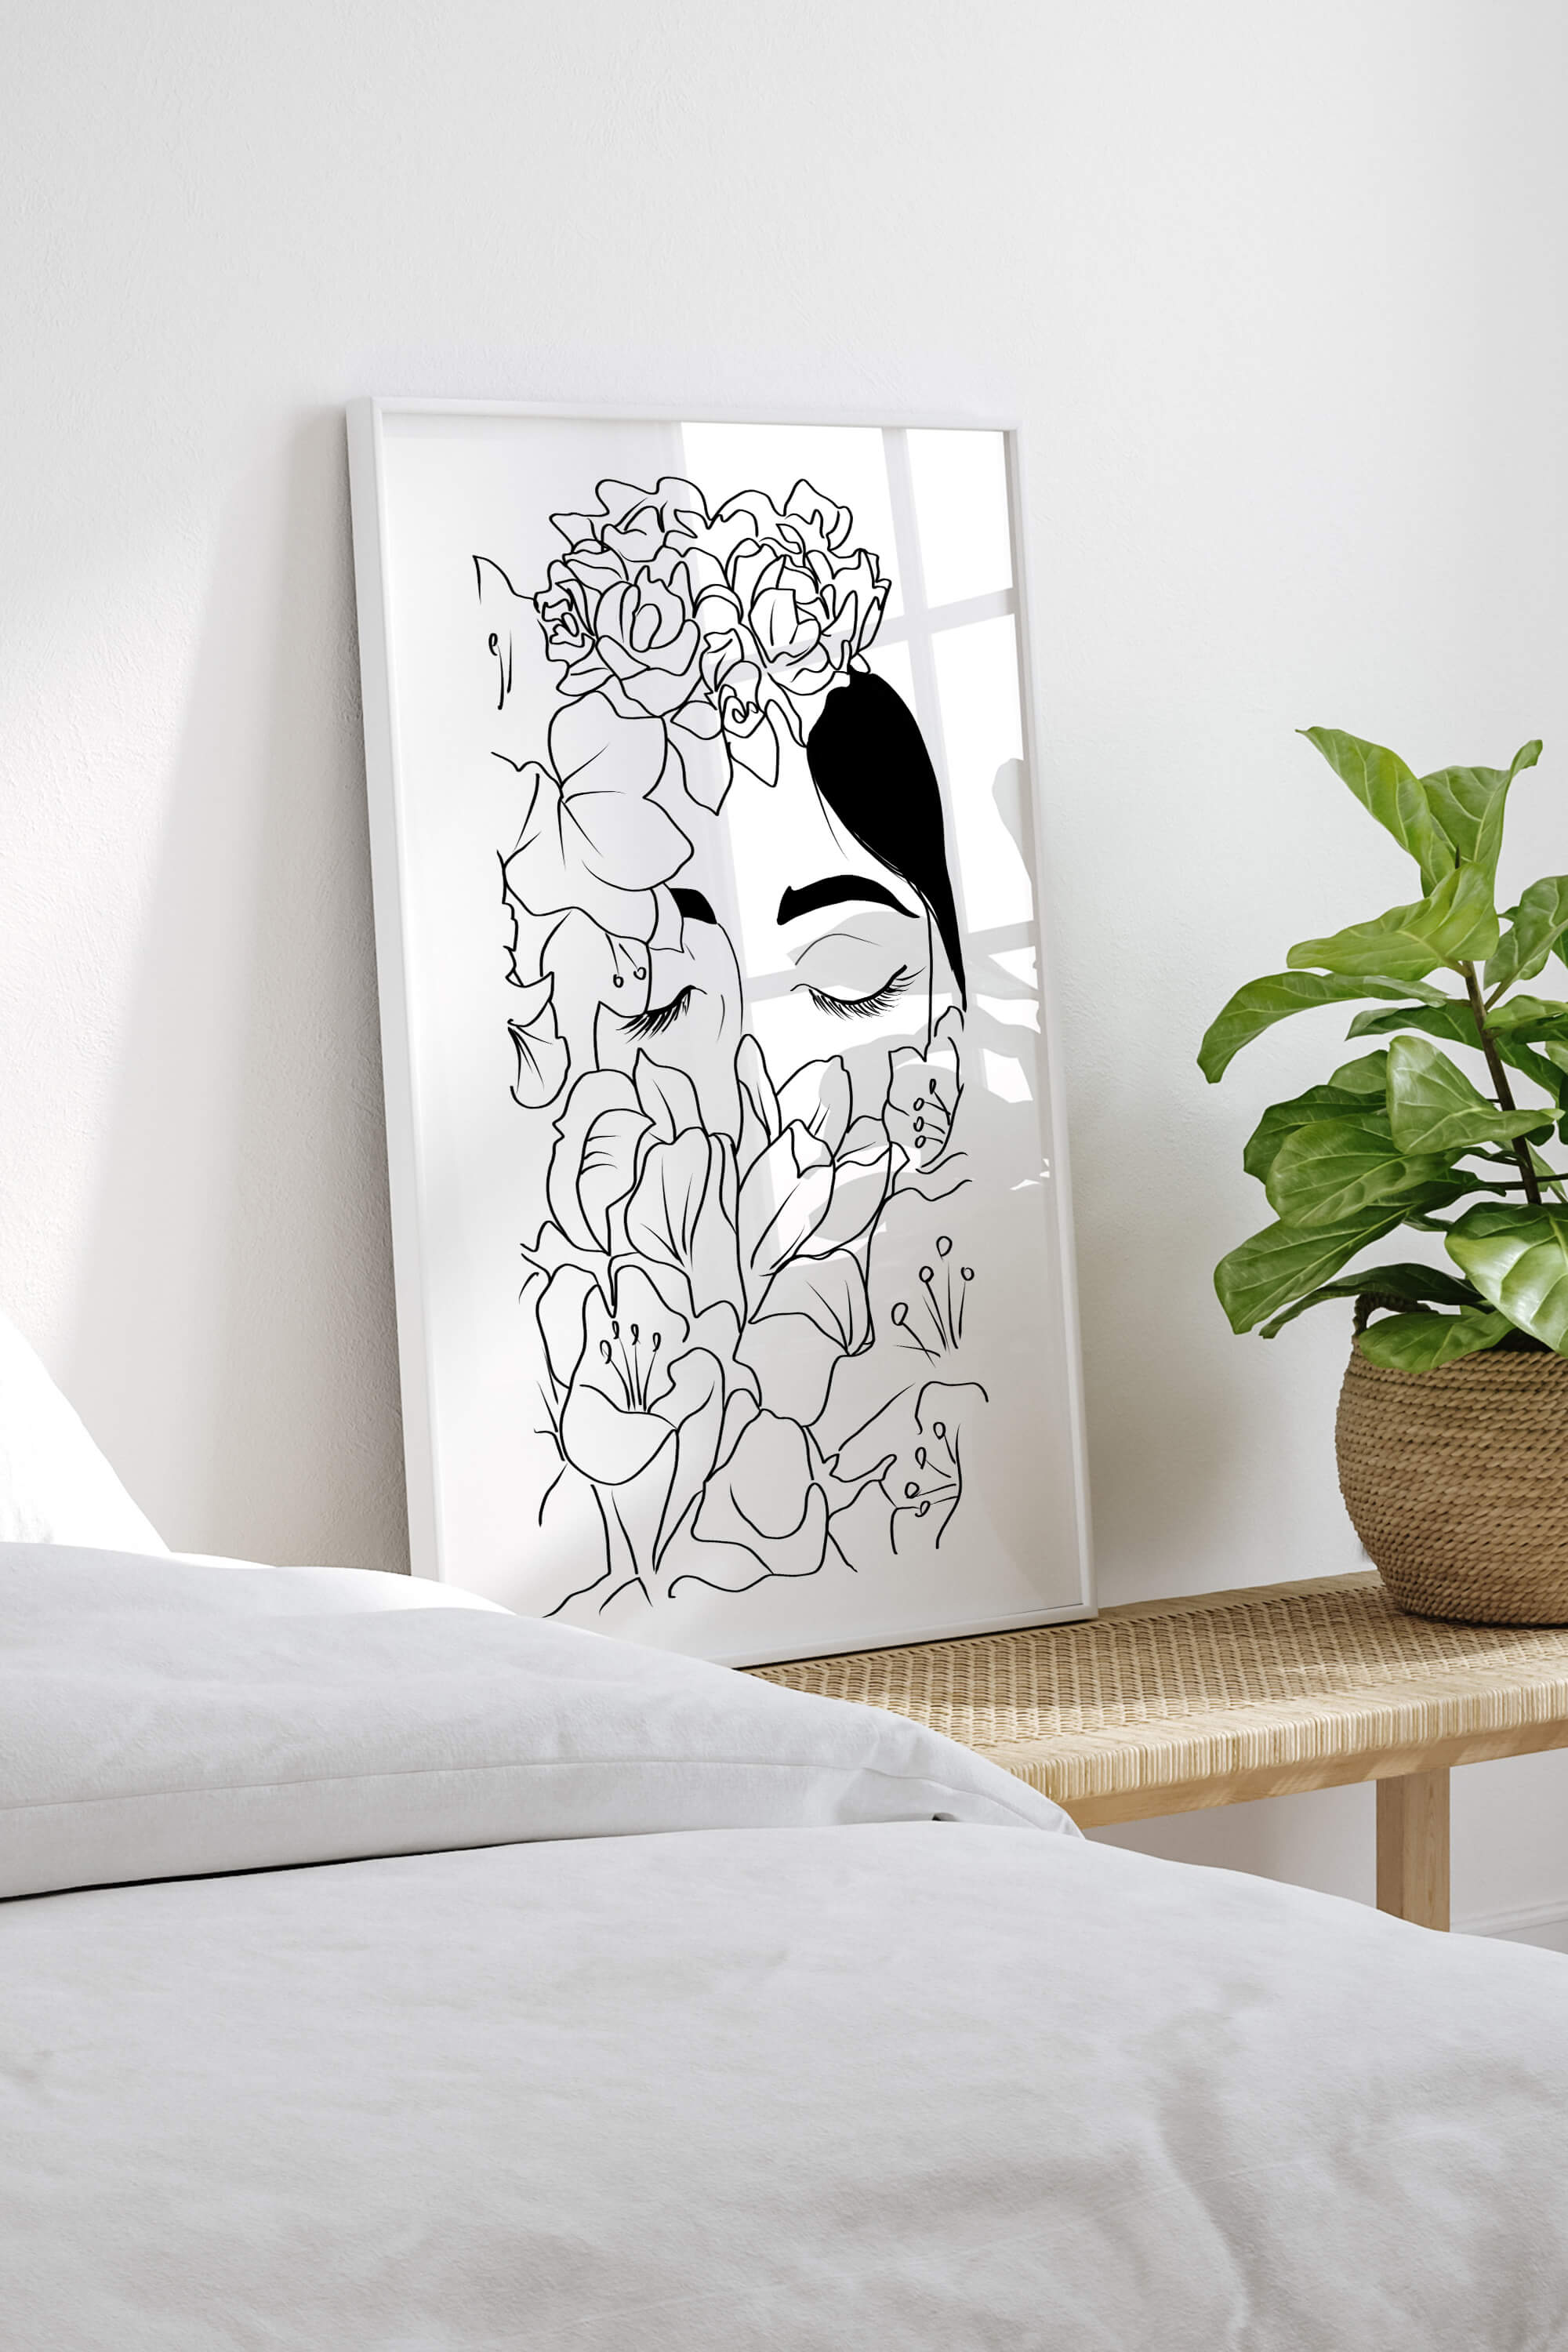 Boho-inspired wall art celebrating feminist expression, portraying a woman with a flower-covered face. A modern symbol of strength and beauty for any space.